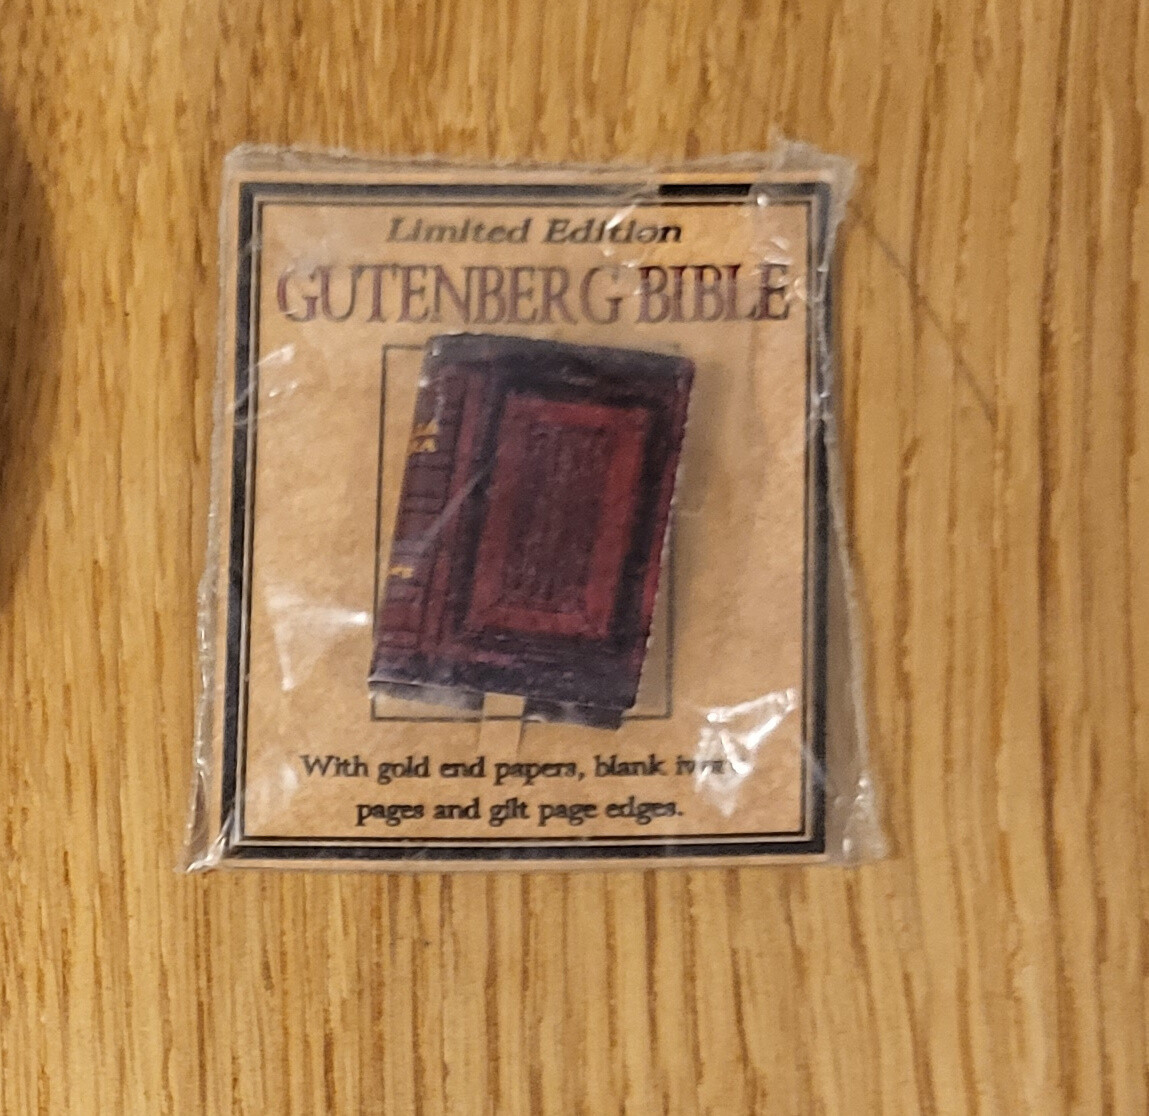 Doll House Miniature of the Gutenberg Bible